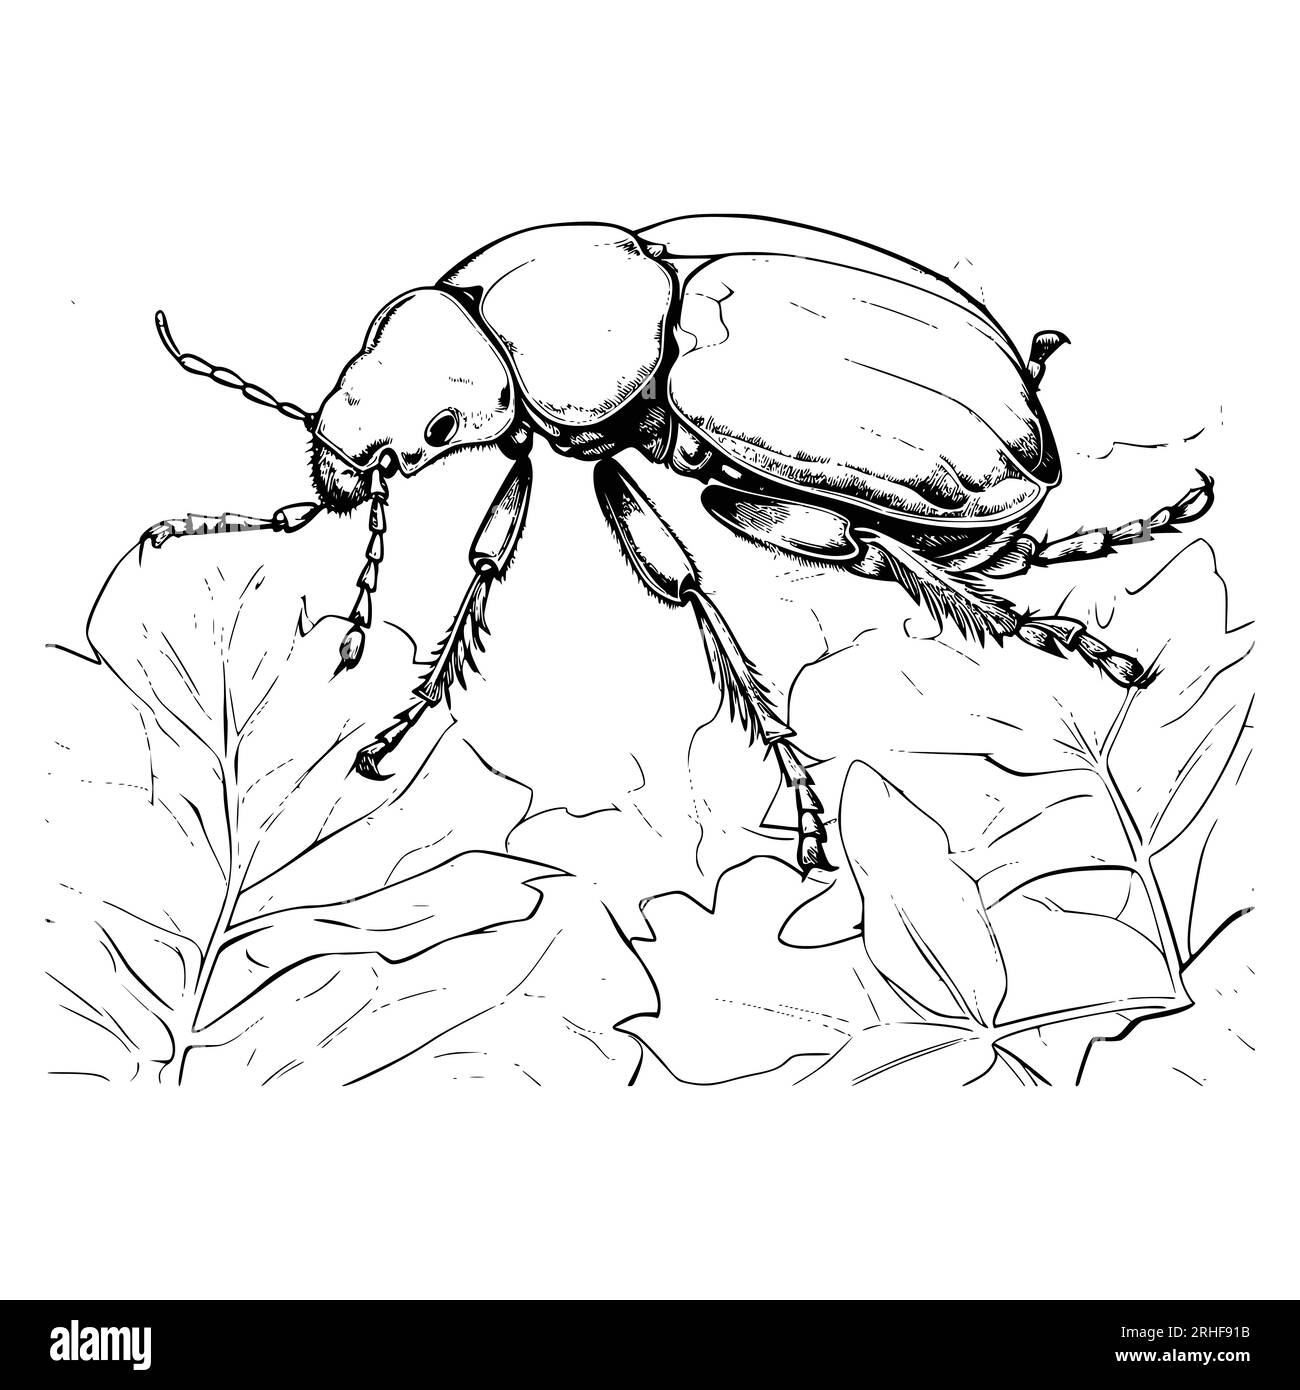 Beetle Coloring Page for Kids Stock Vector